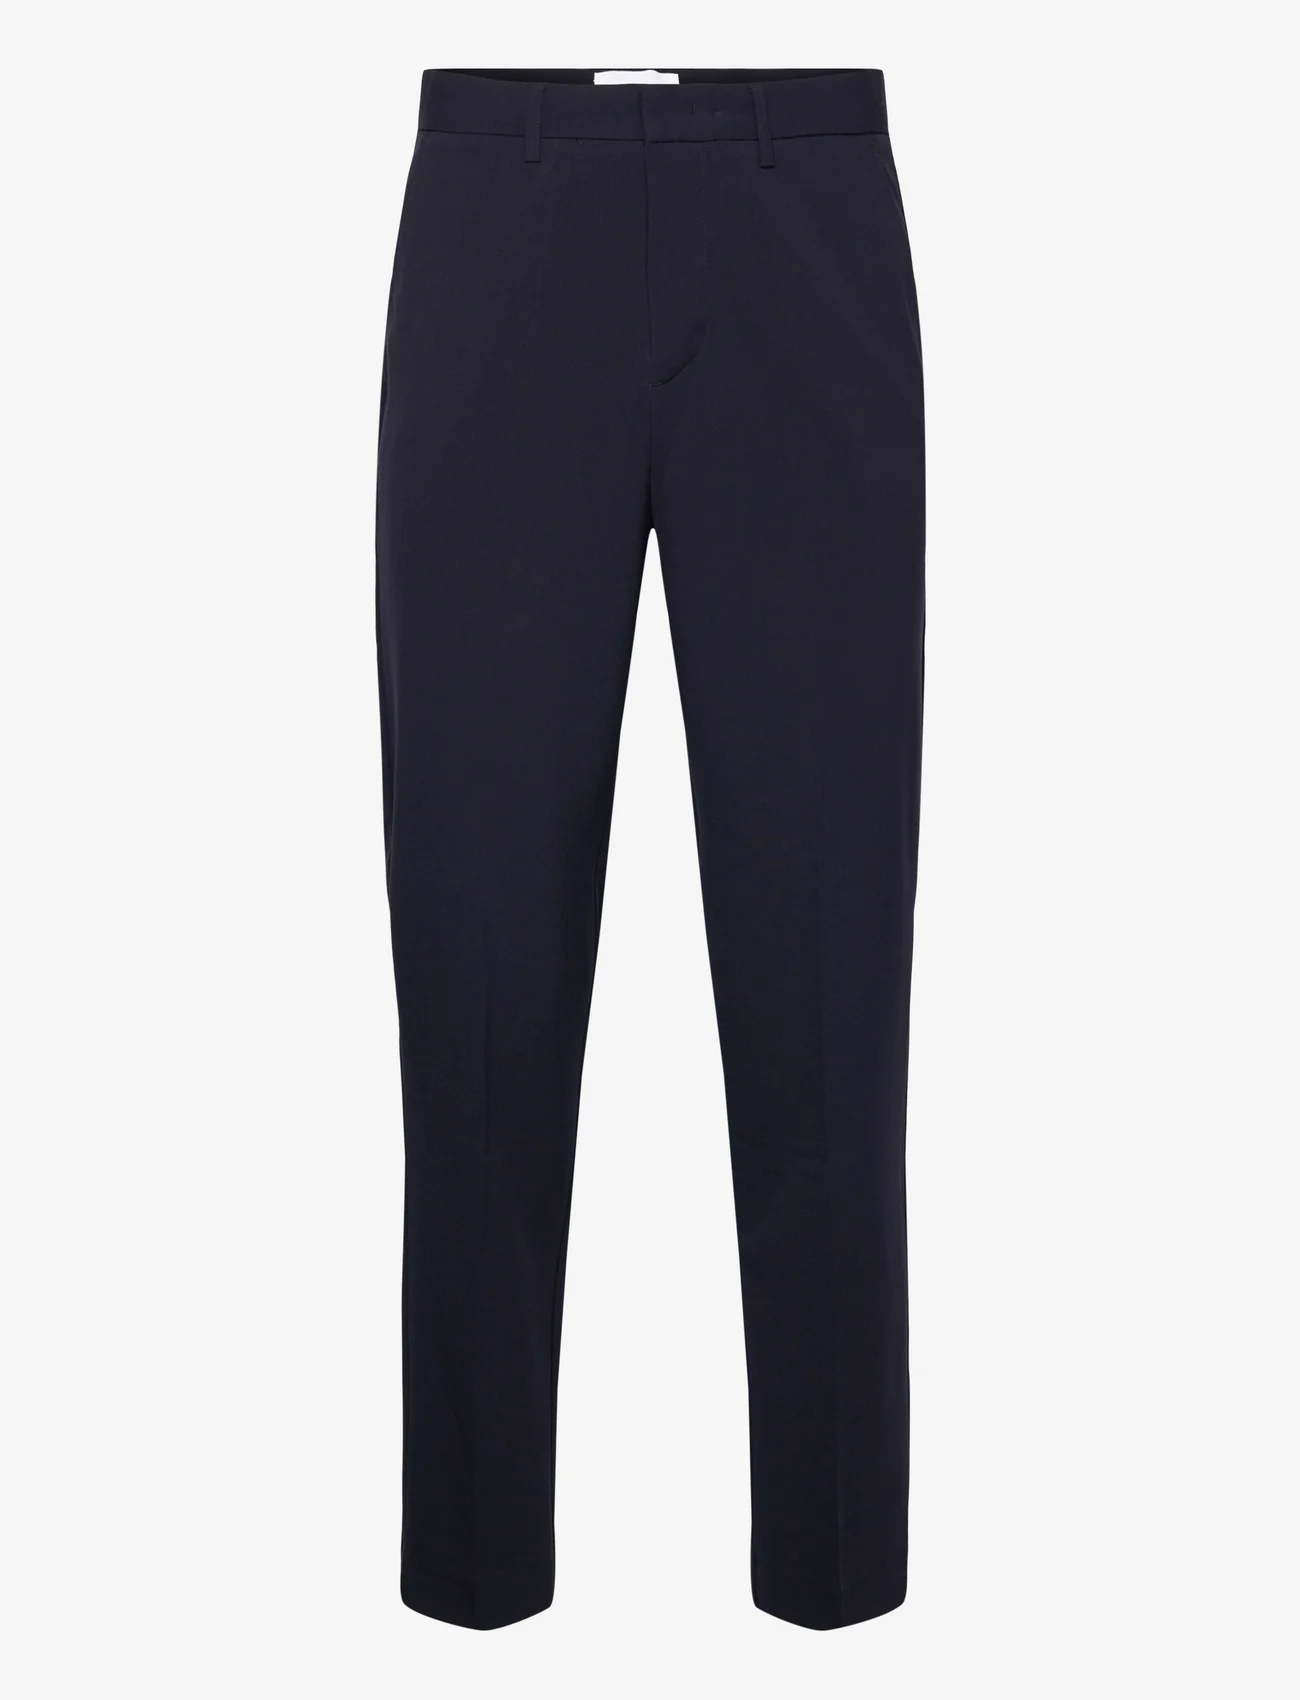 Lindbergh - Relaxed fit formal pants - anzugshosen - navy - 0